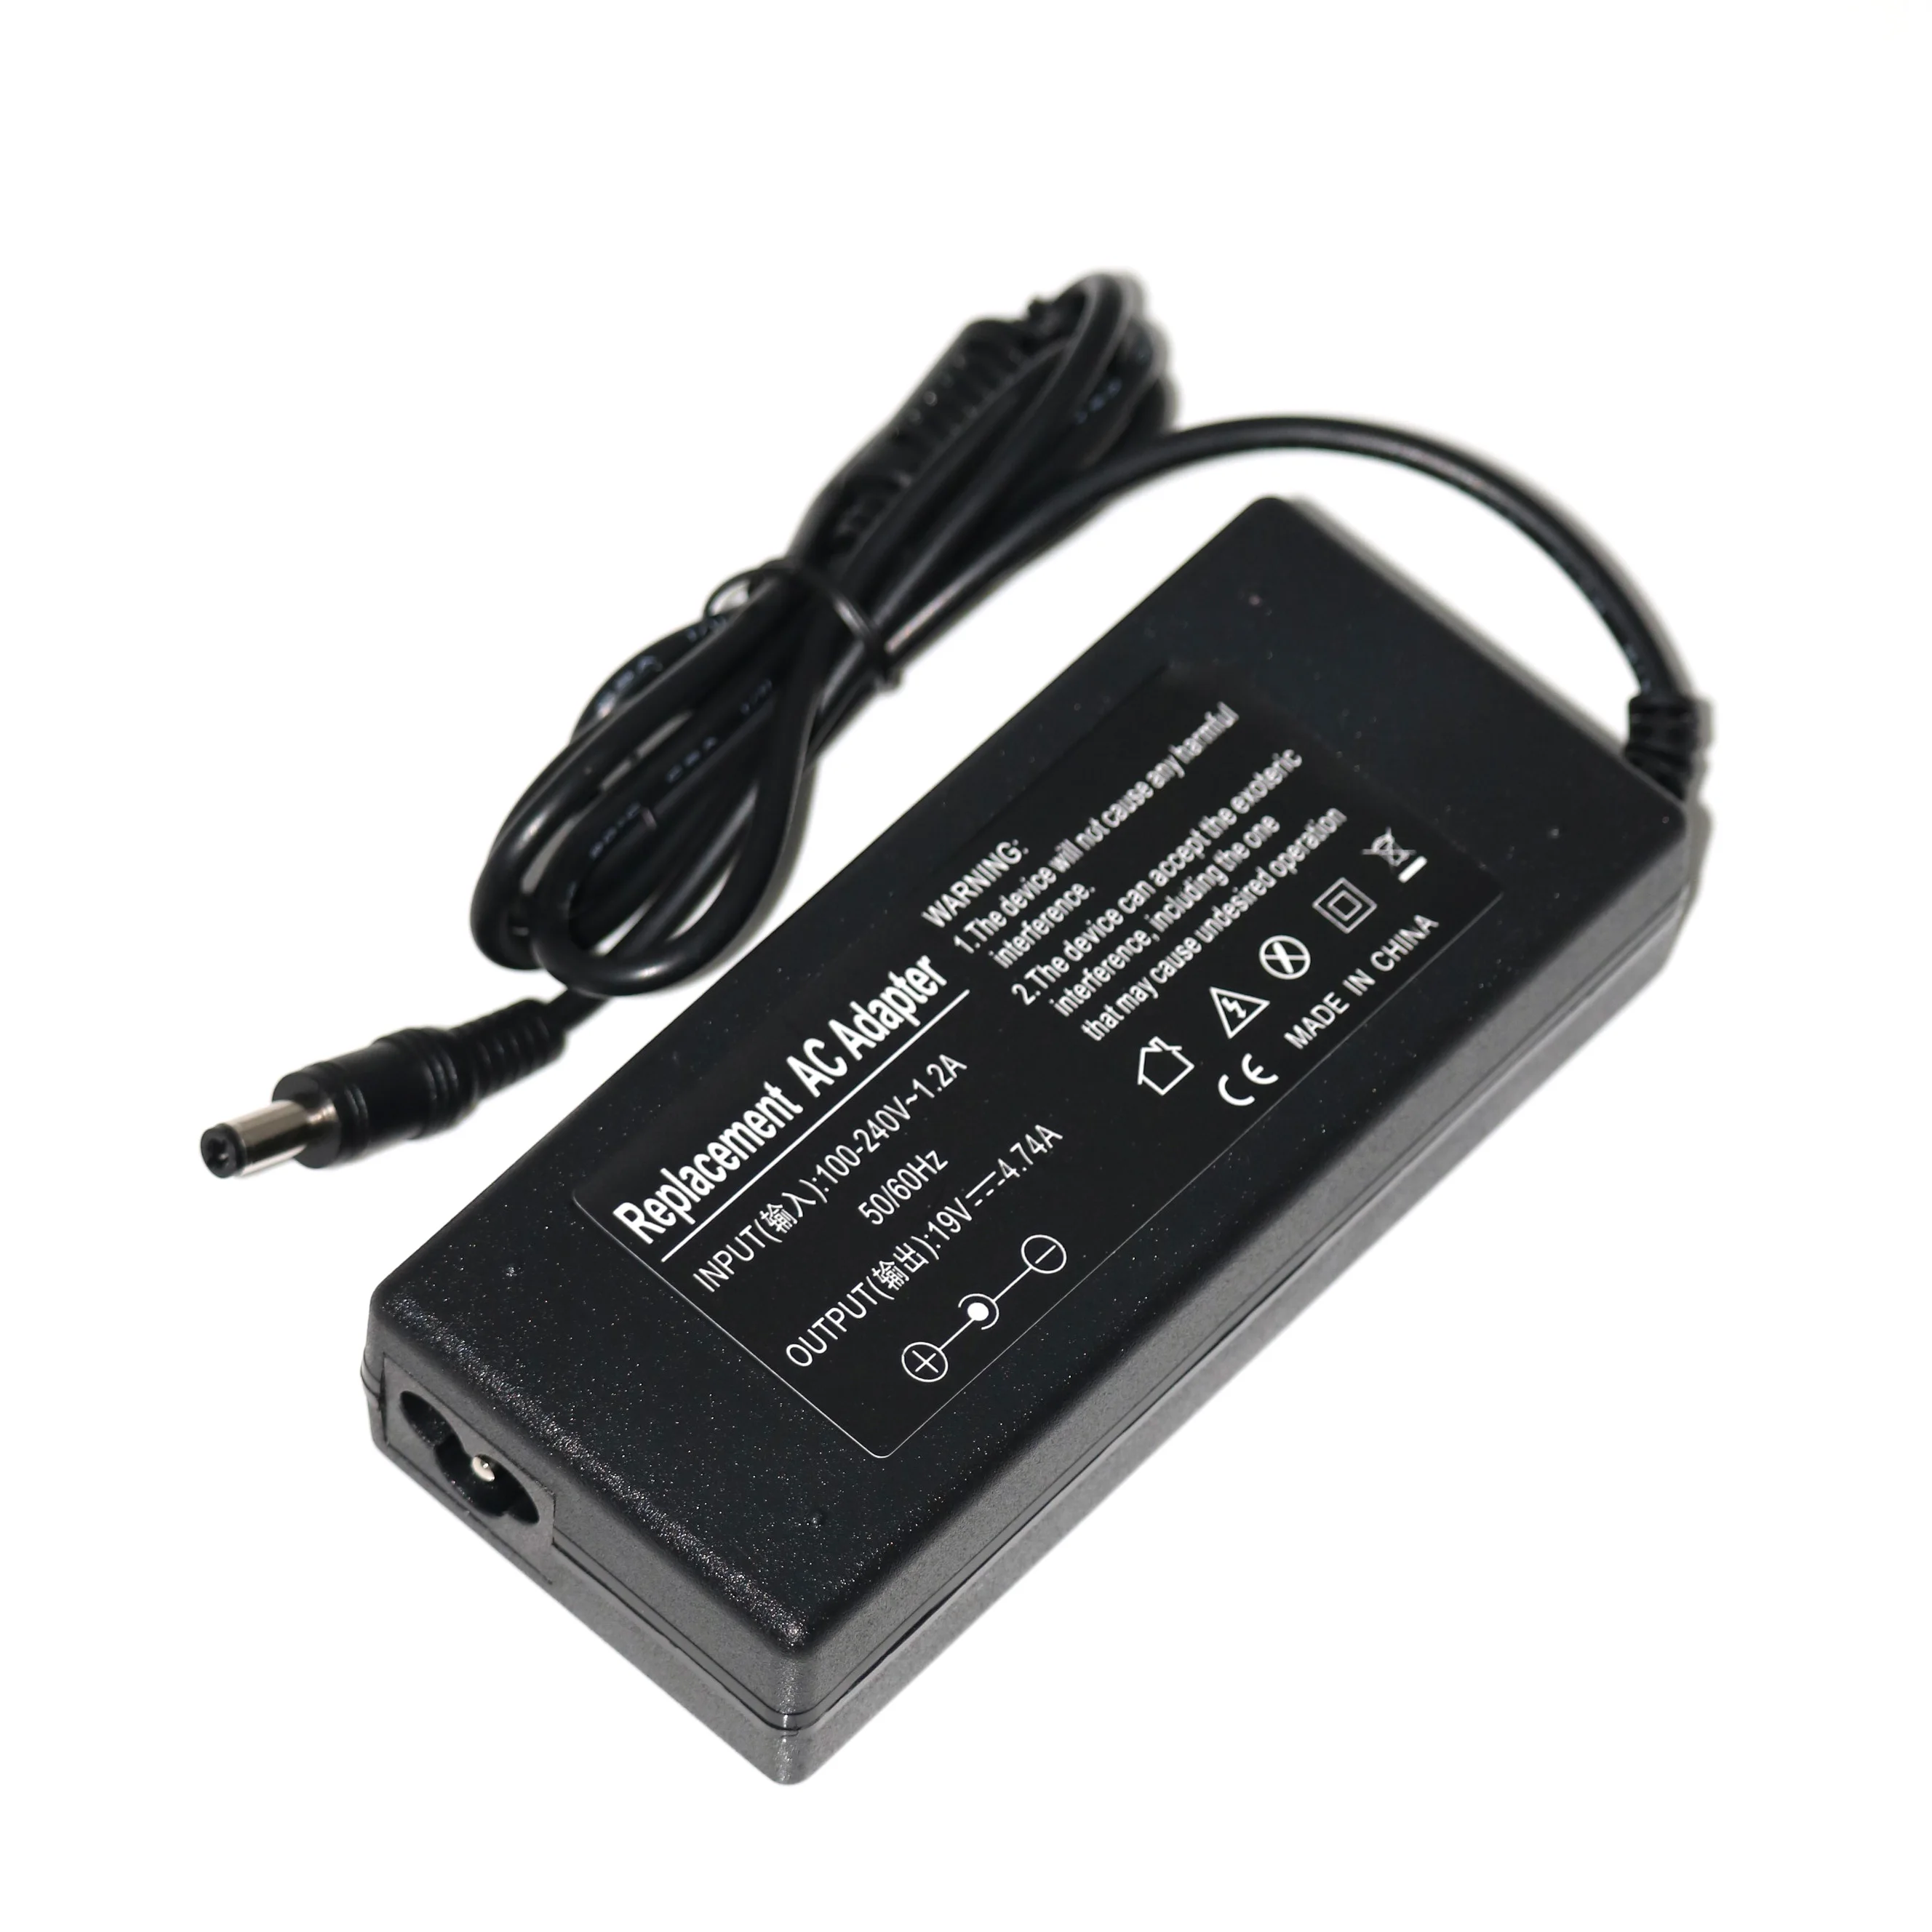 

19V 4.74A Asus 90W Laptop Charger AC/DC Adapter For Asus K52F K52J K53E K53S K53SV K53U K55 K550LA K55A K55N K55VD Power Supply